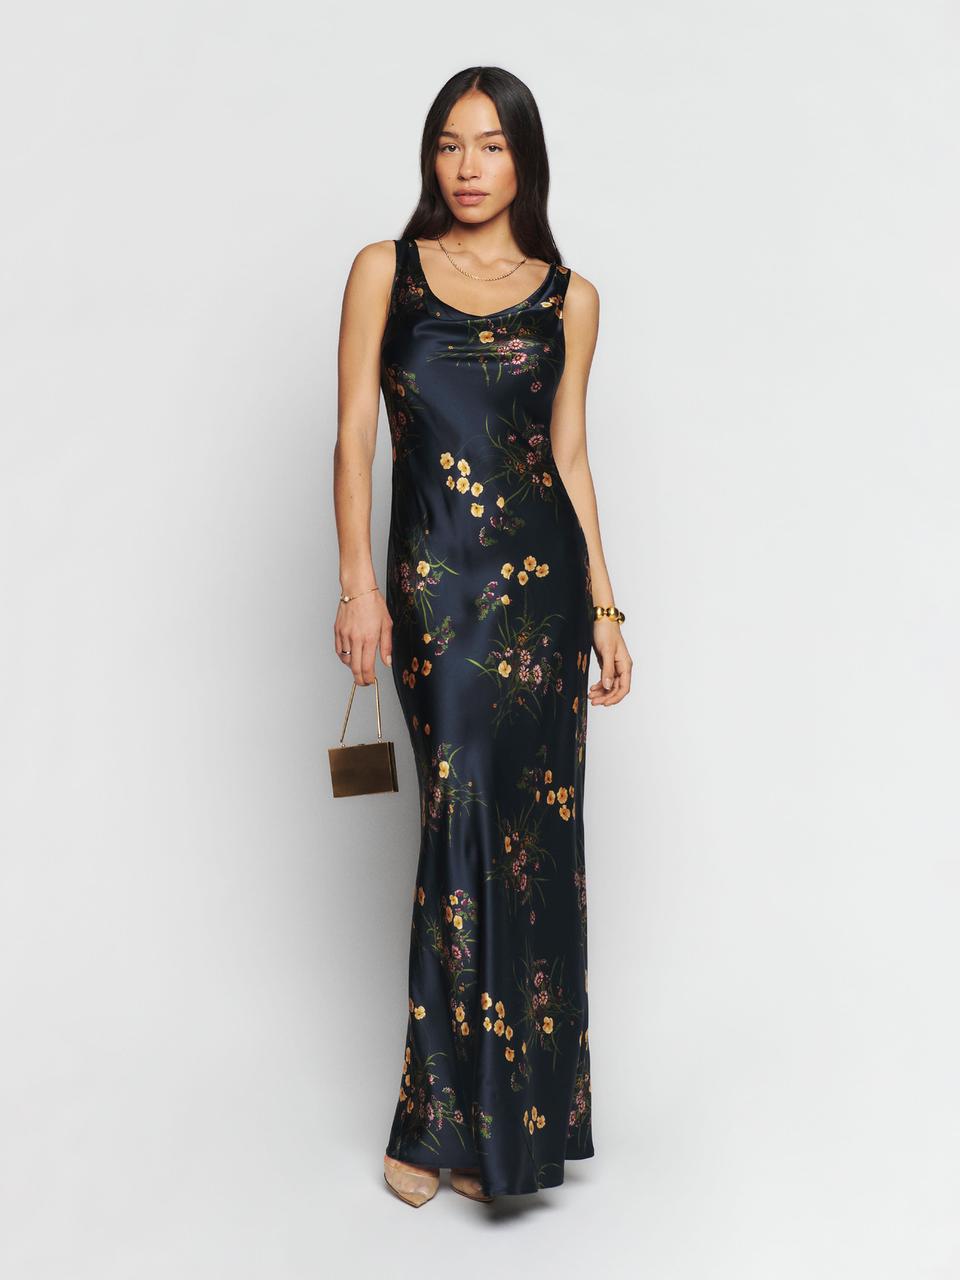 32 Spring Wedding Guest Dresses for March Through June 2023